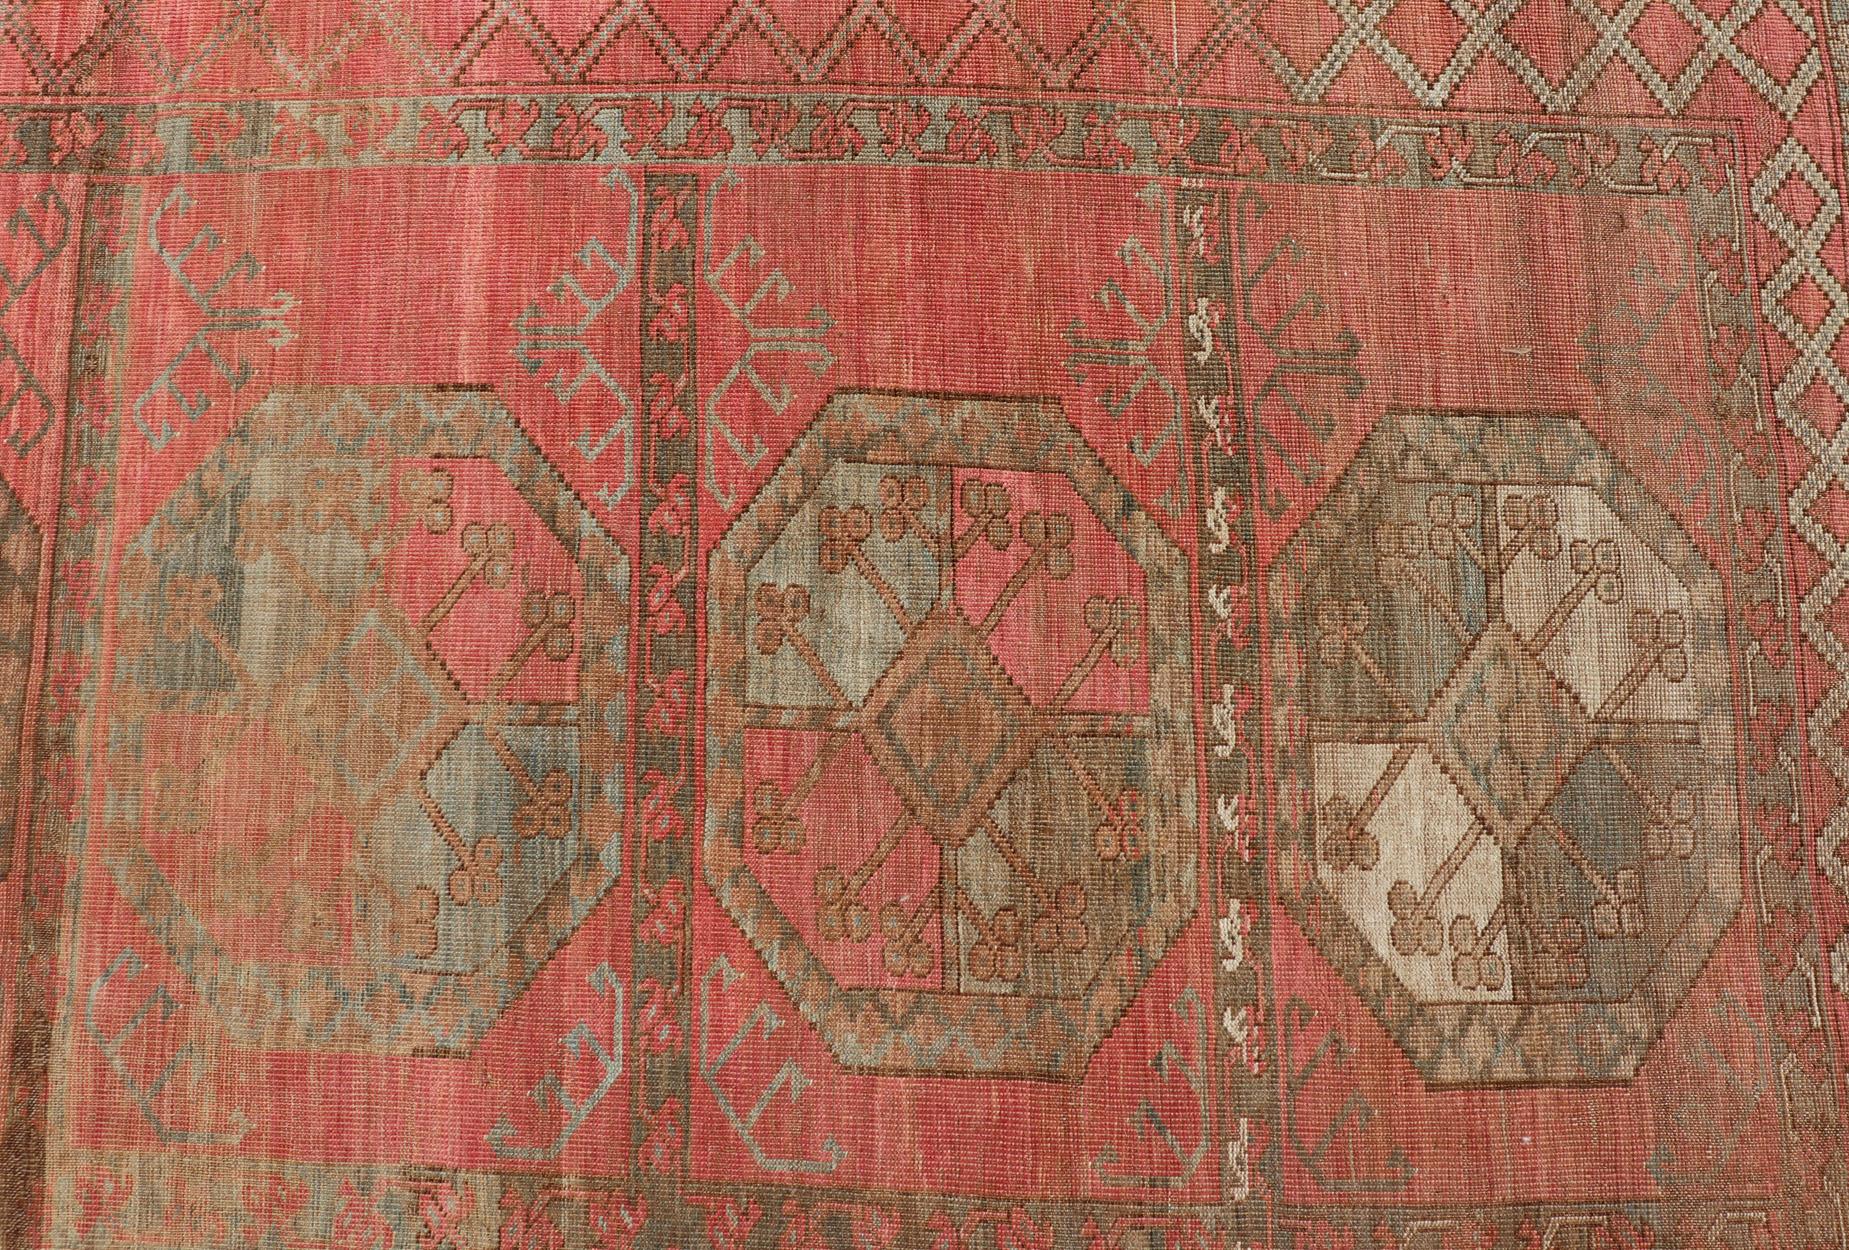 Antique Persian Ersari/ Turkomen rug in coral/red tones with geometric motifs. Keivan Woven Arts / rug EMB-8522-178691, Turkomen, circa 1930.
Measures: 10'4 x 15'6 
This beautiful Turkomen carpet is characterized by its all-over and large scale Gul